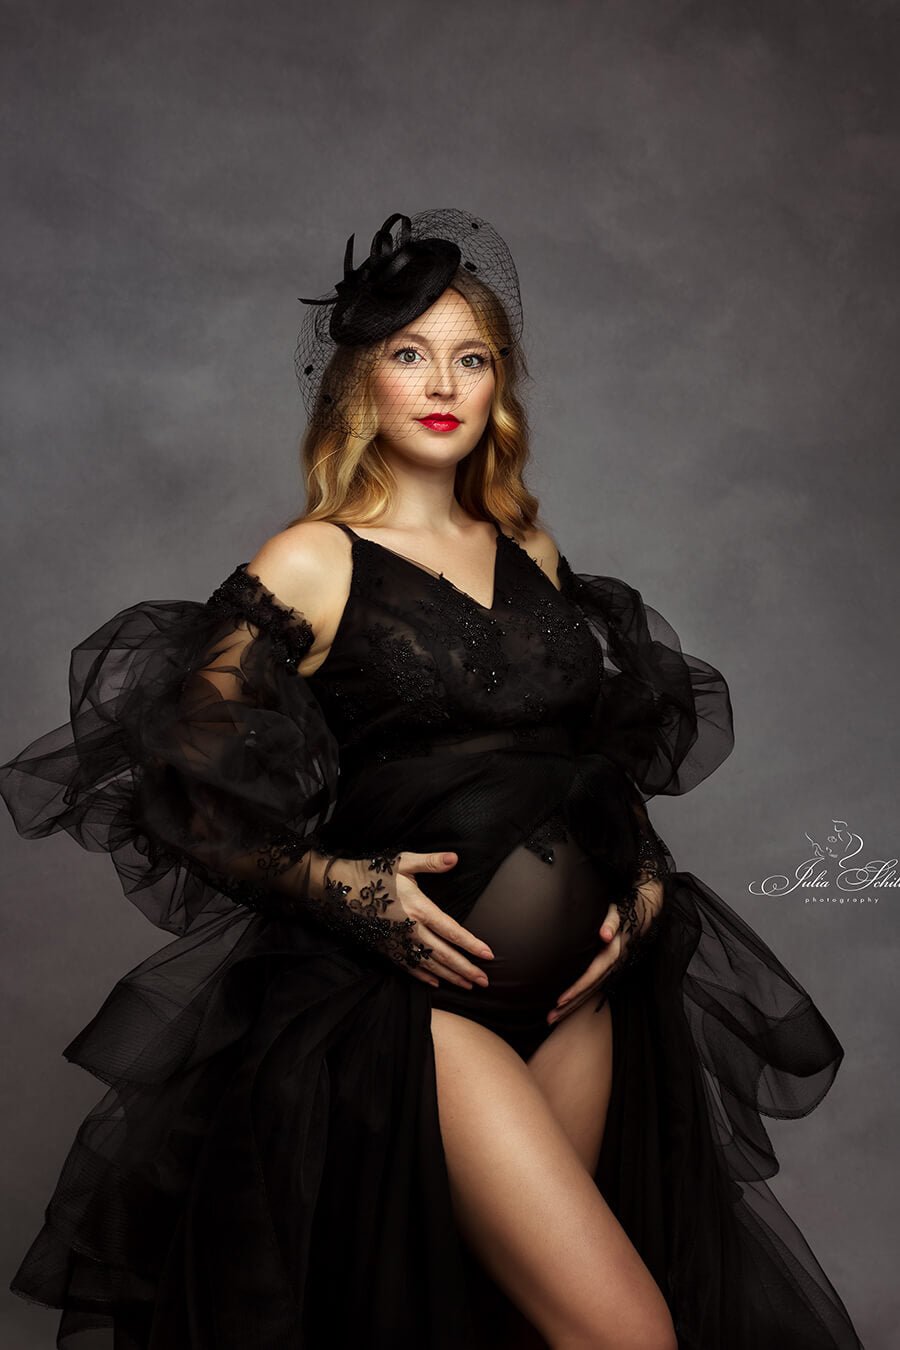 blond pregnant model wearing a black bodysuit made of mesh and bridal lace. she has a tulle cape to match the dramatic style. 